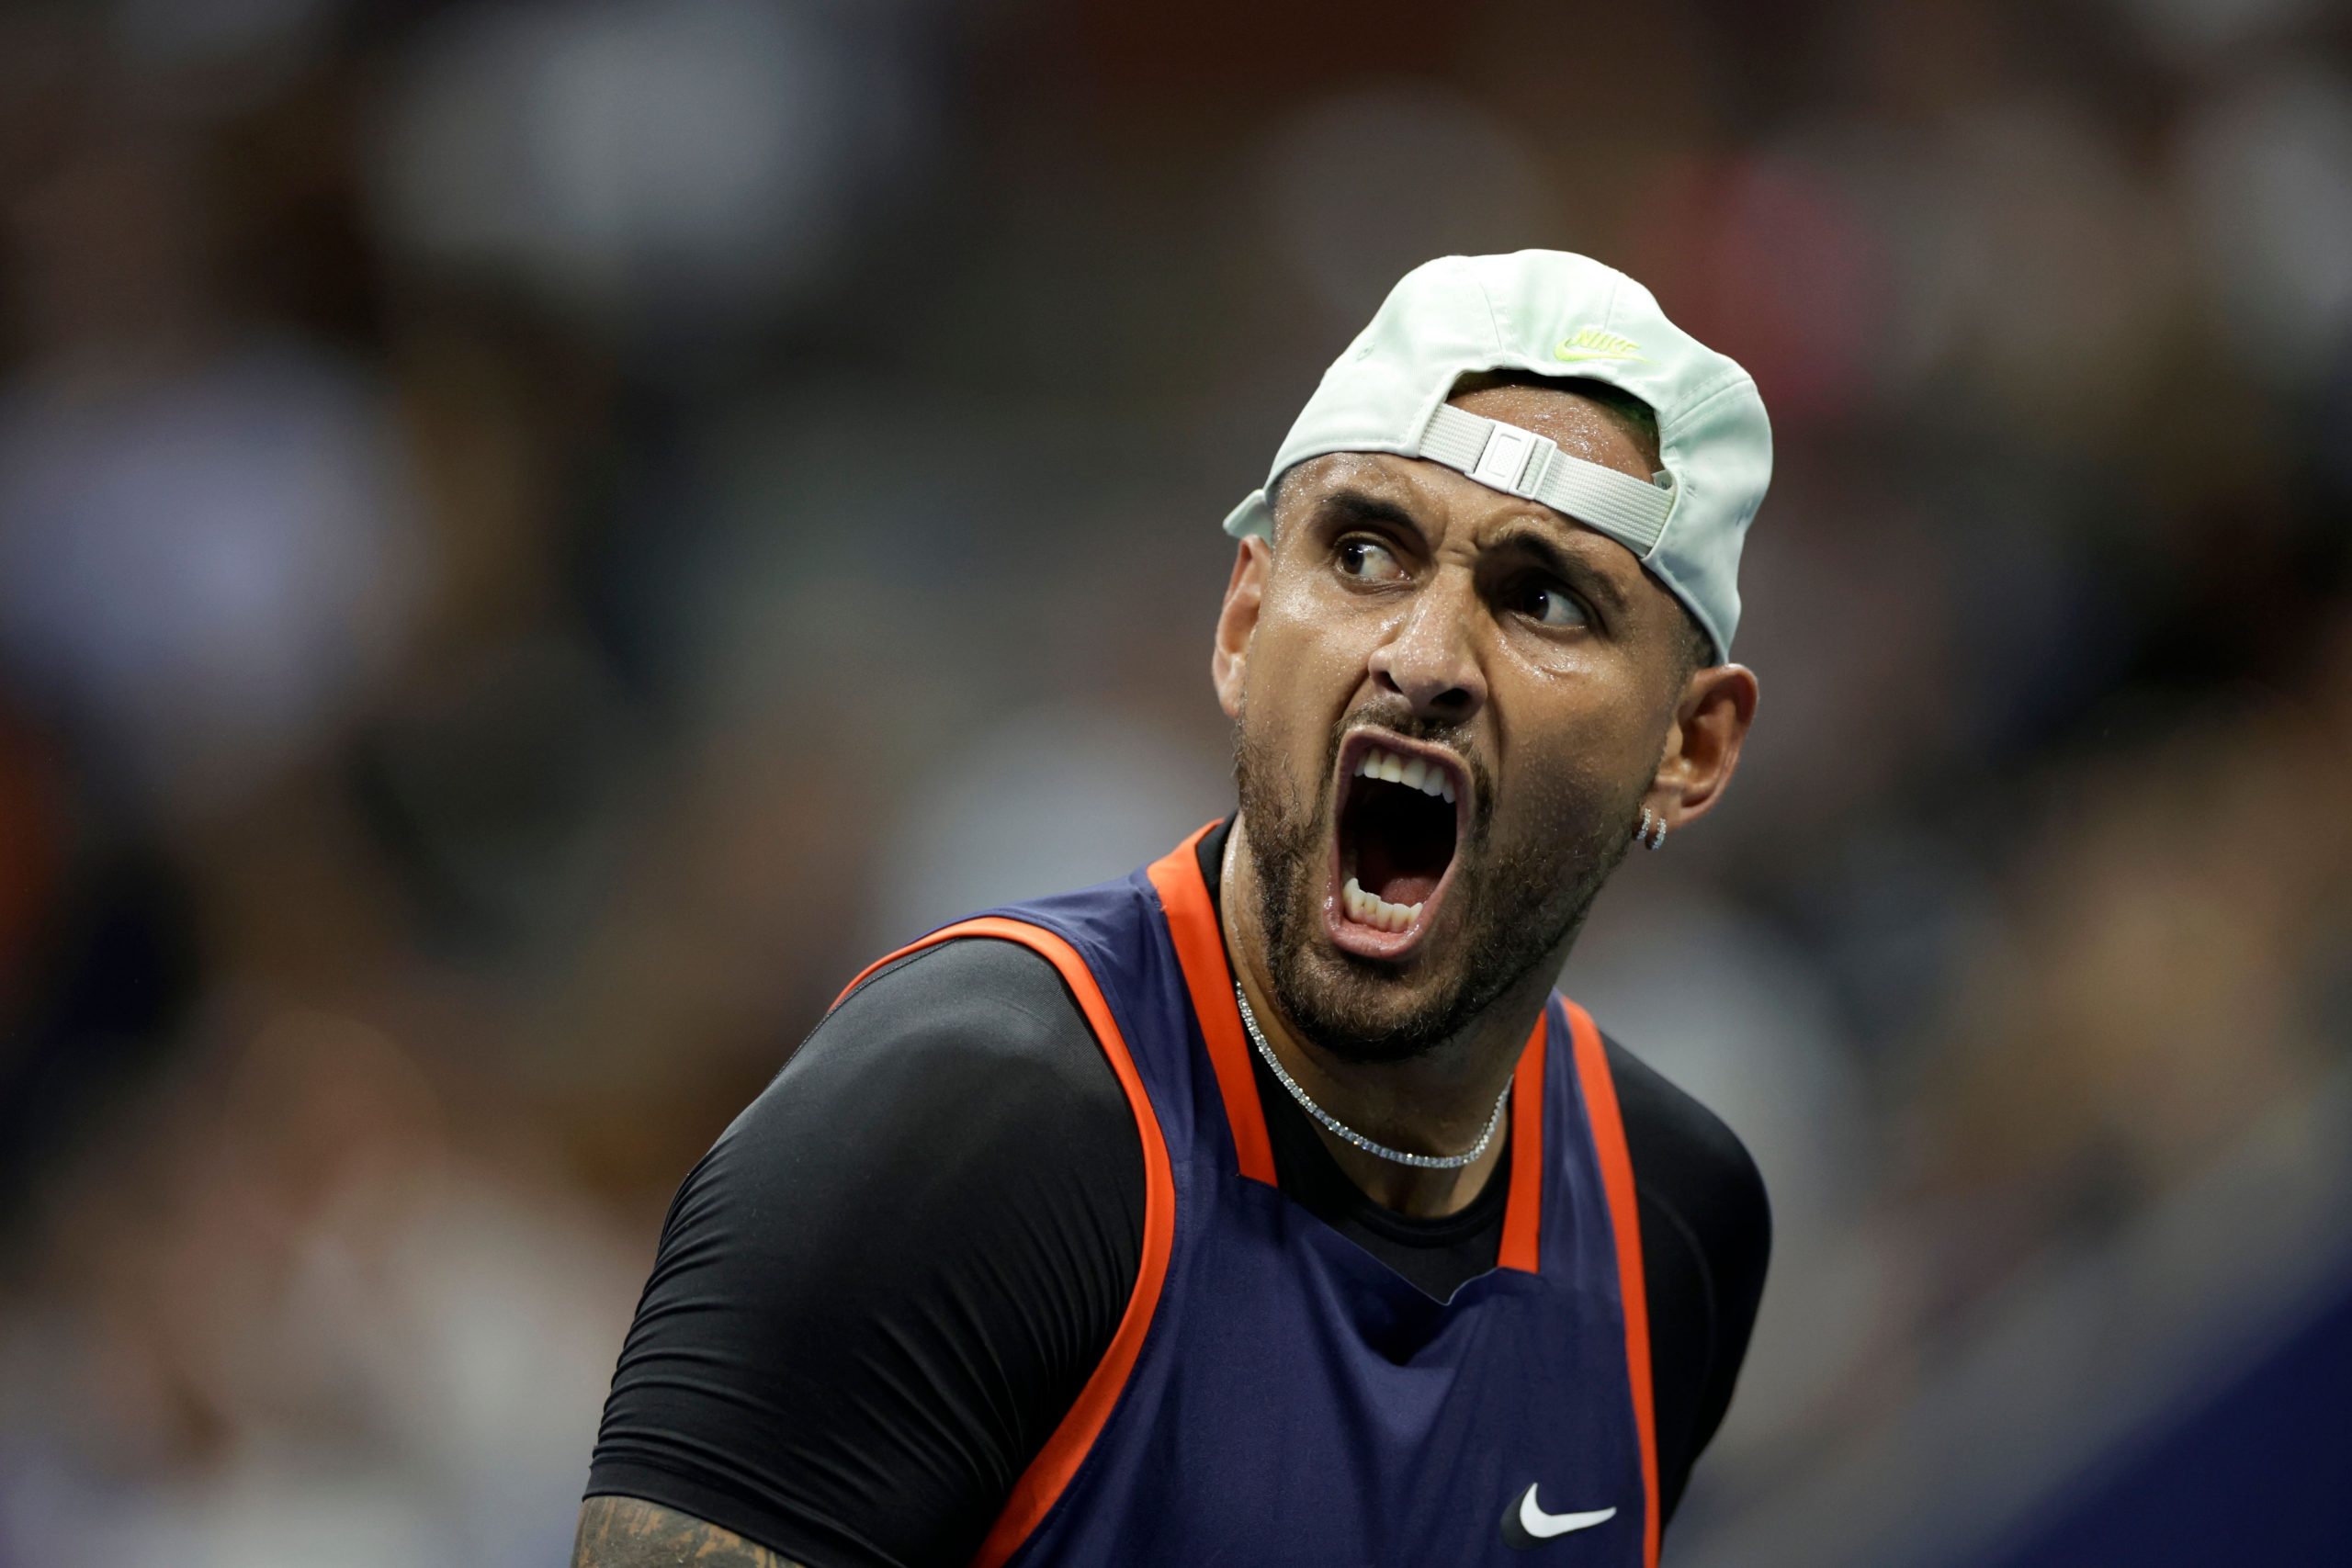 Nick Kyrgios beats Daniil Medvevev even after confusion with rule